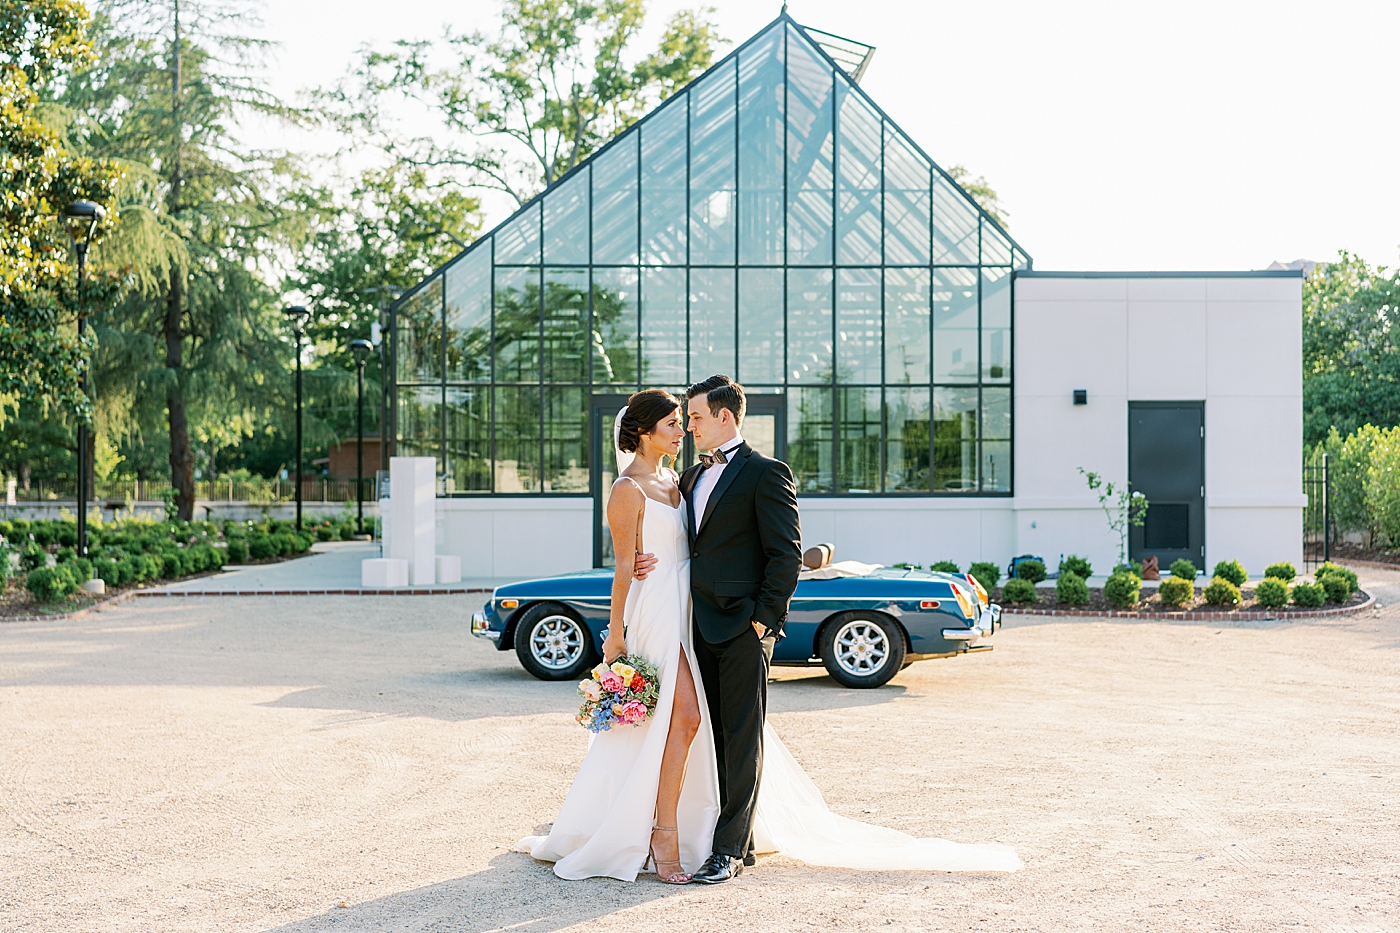 Bride and groom snuggling in front of Boyd Foundation Horticultural Center | Photo by Annie Laura Photo